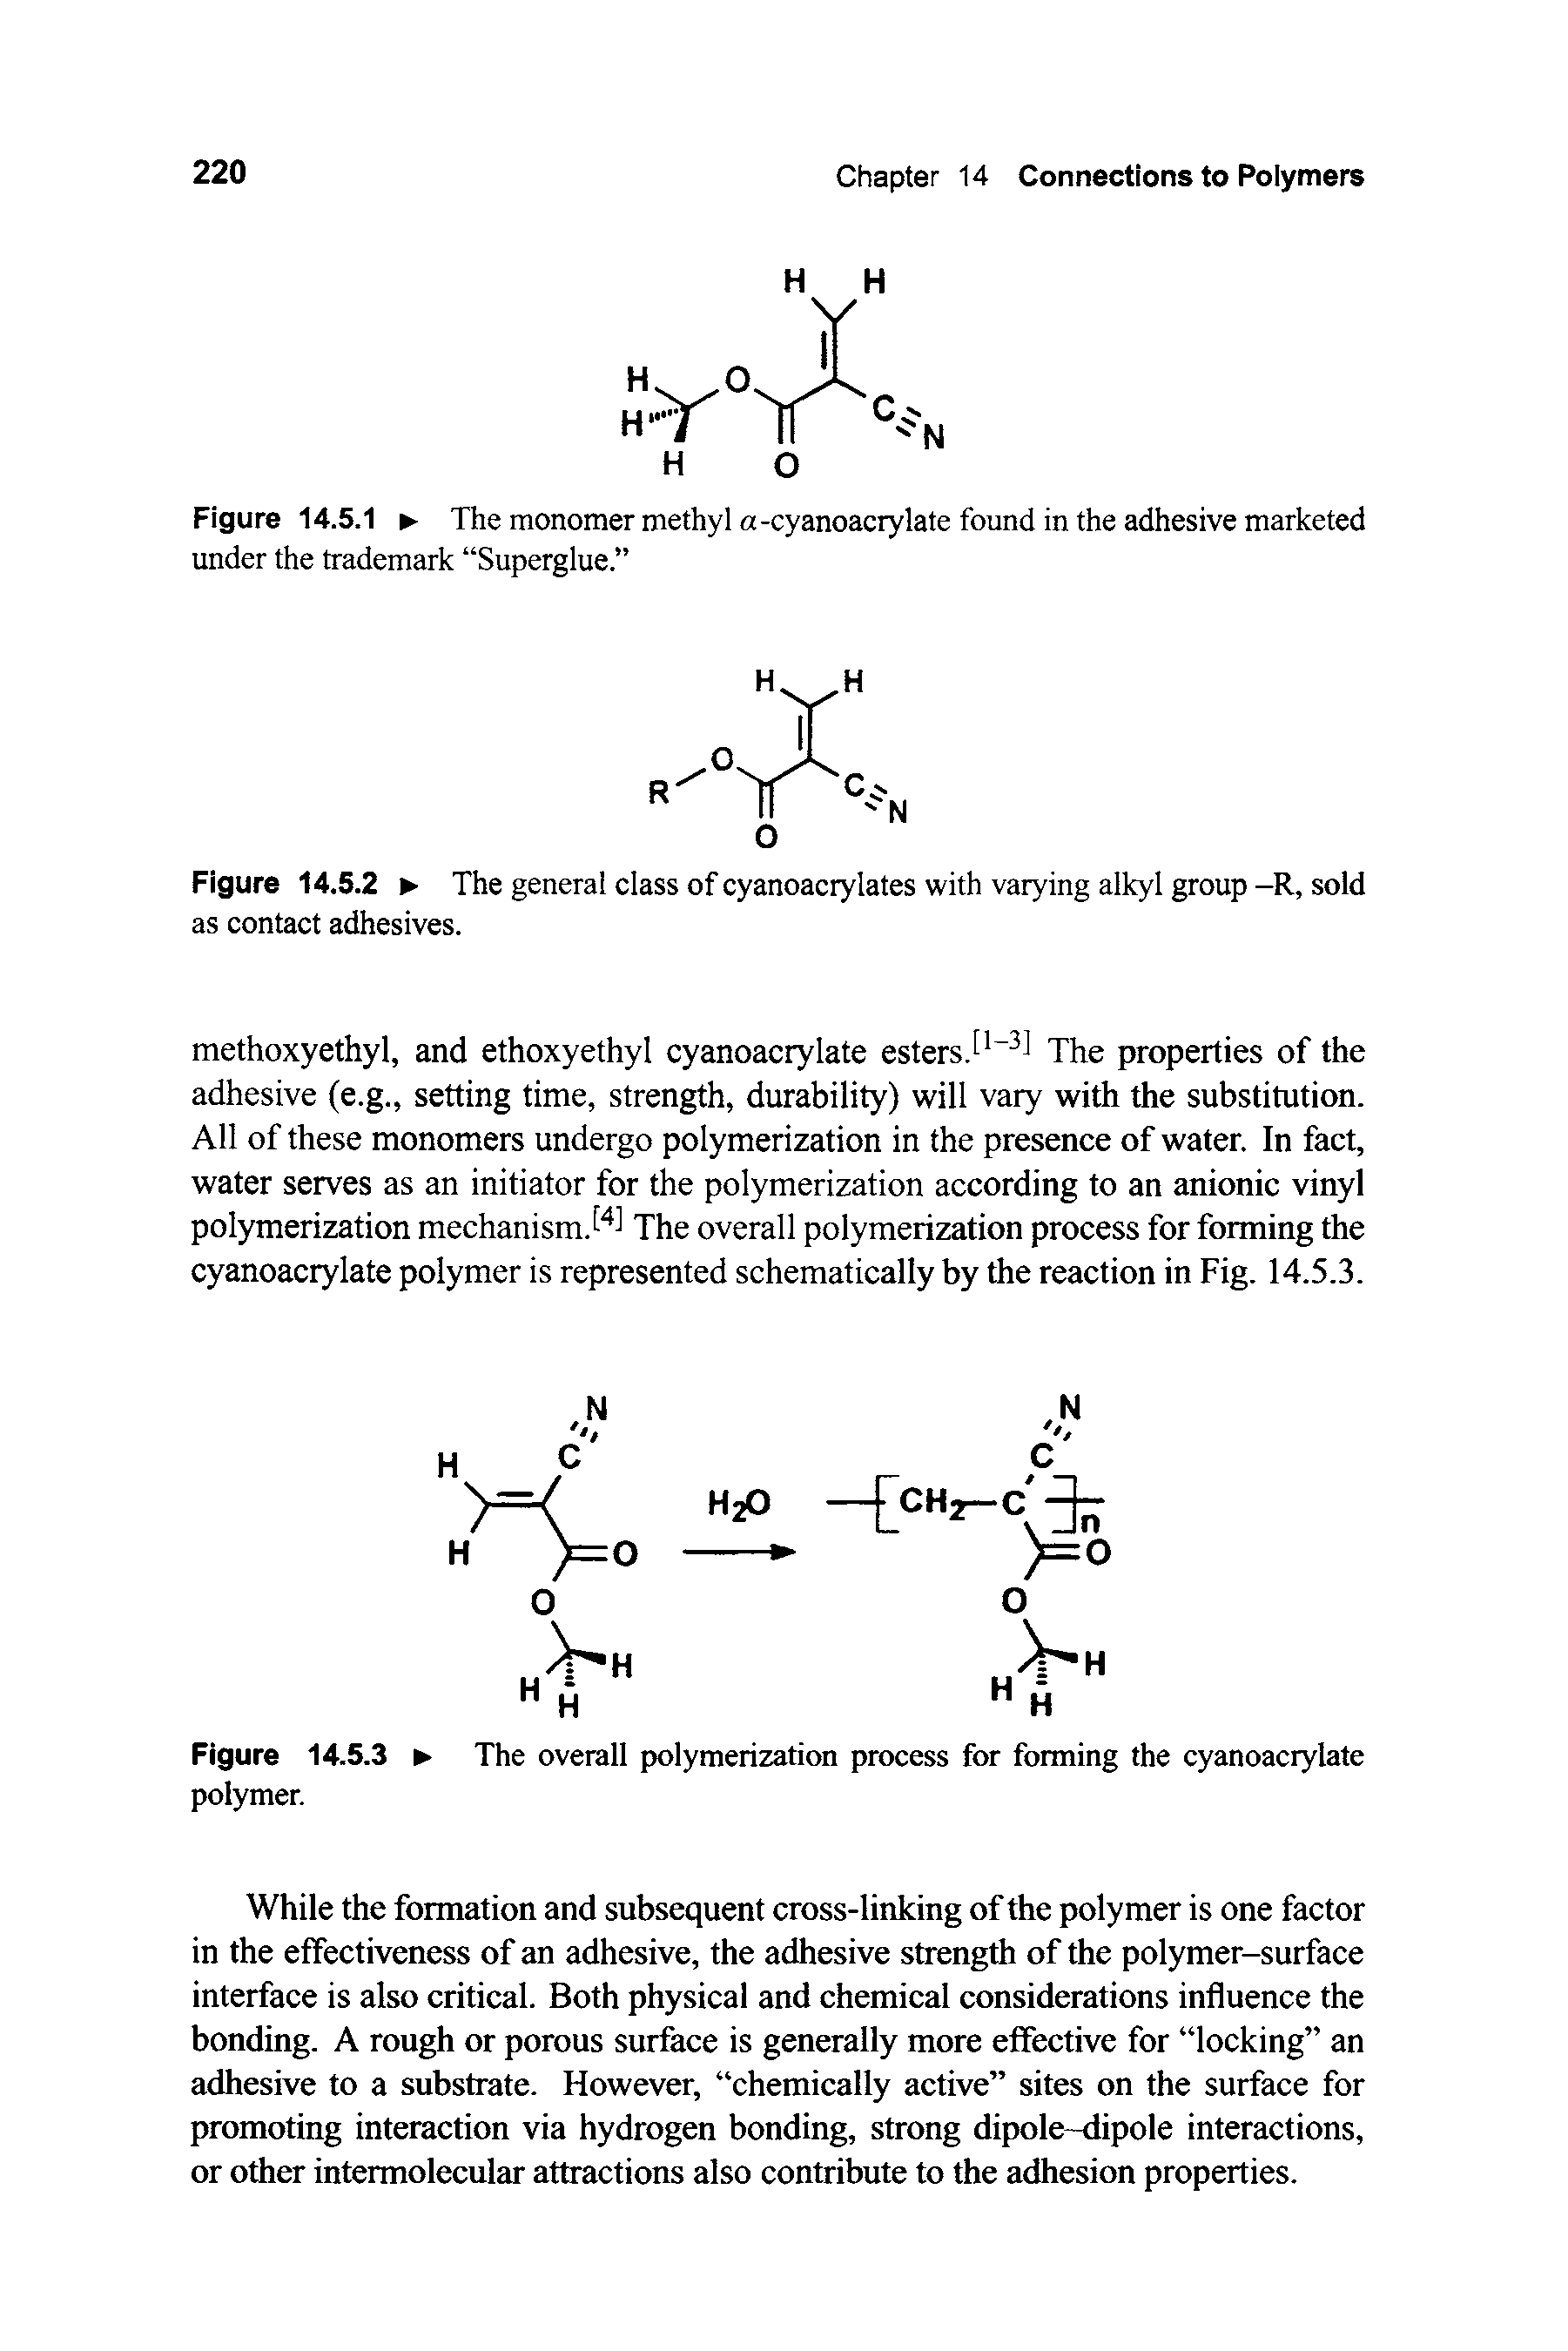 Figure 14.5.3 The overall polymerization process for forming the cyanoacrylate polymer.